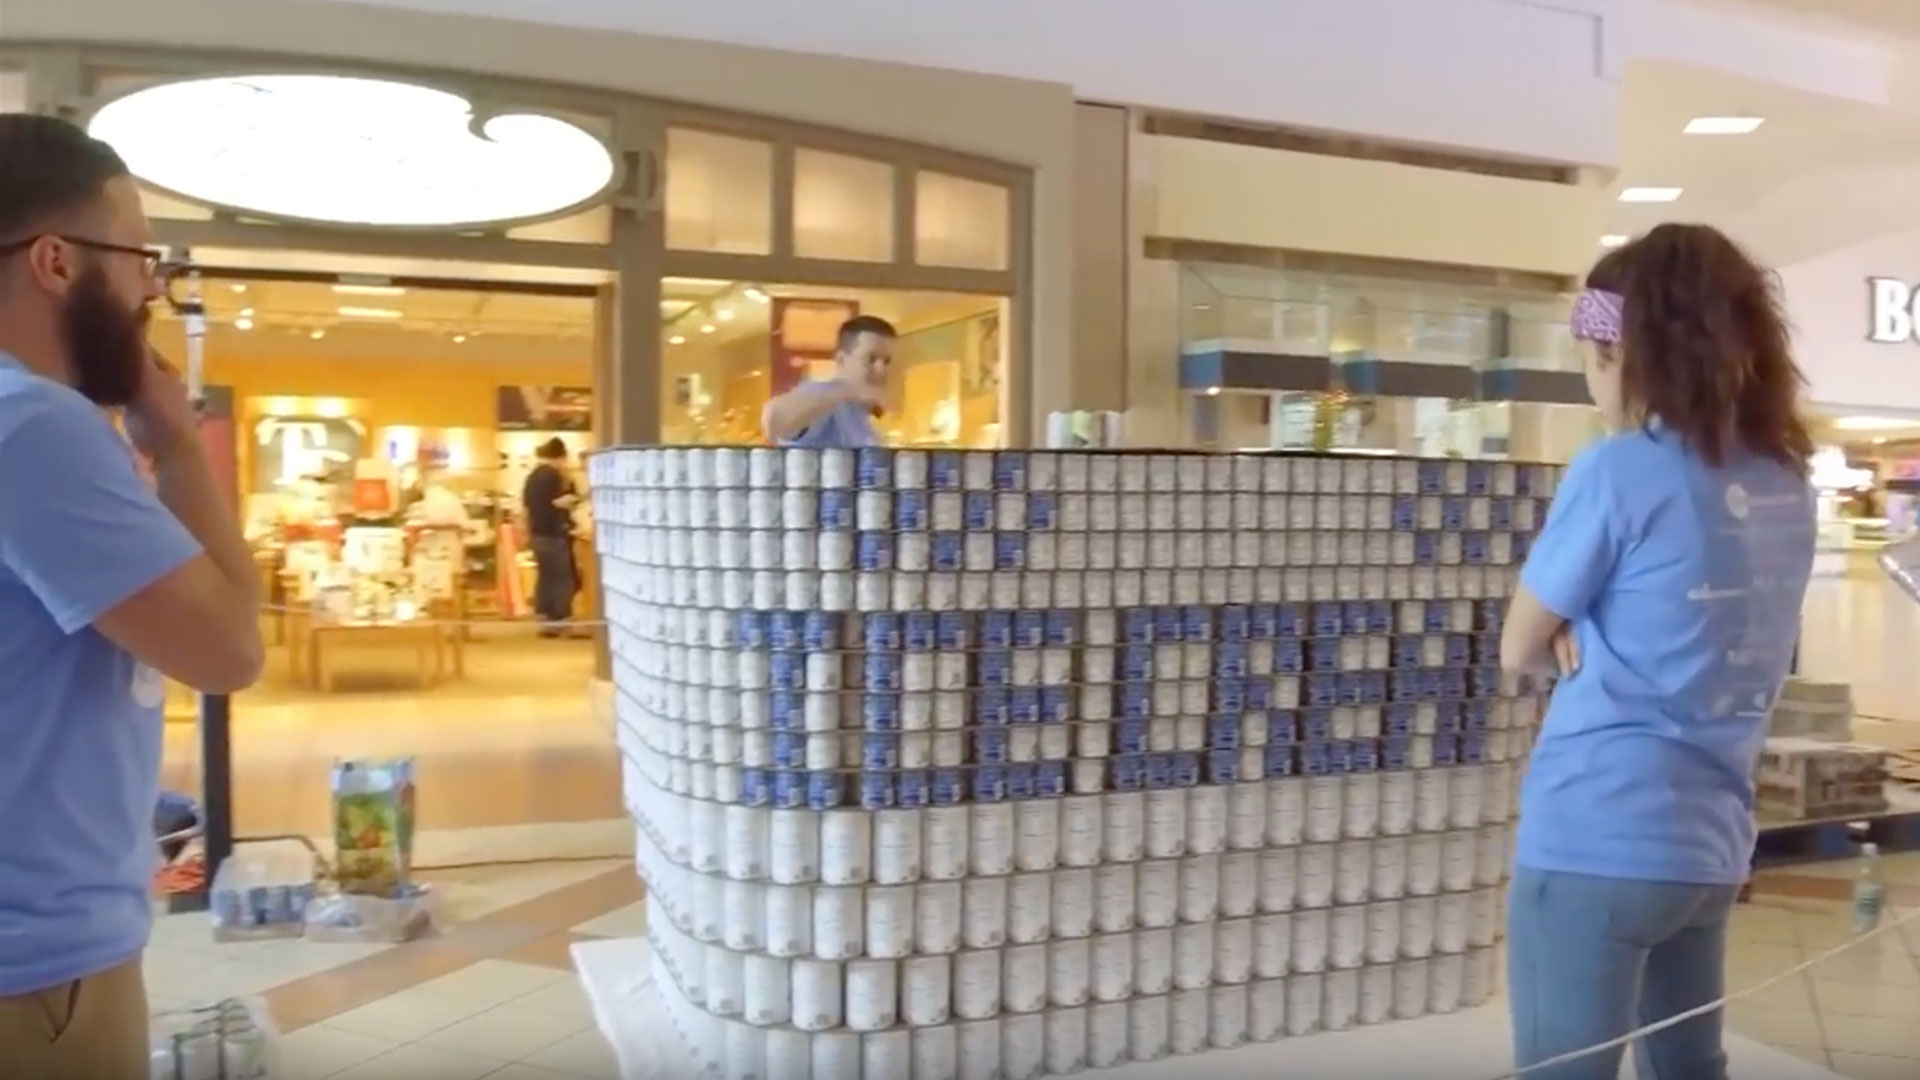 People building structure out of canned food.